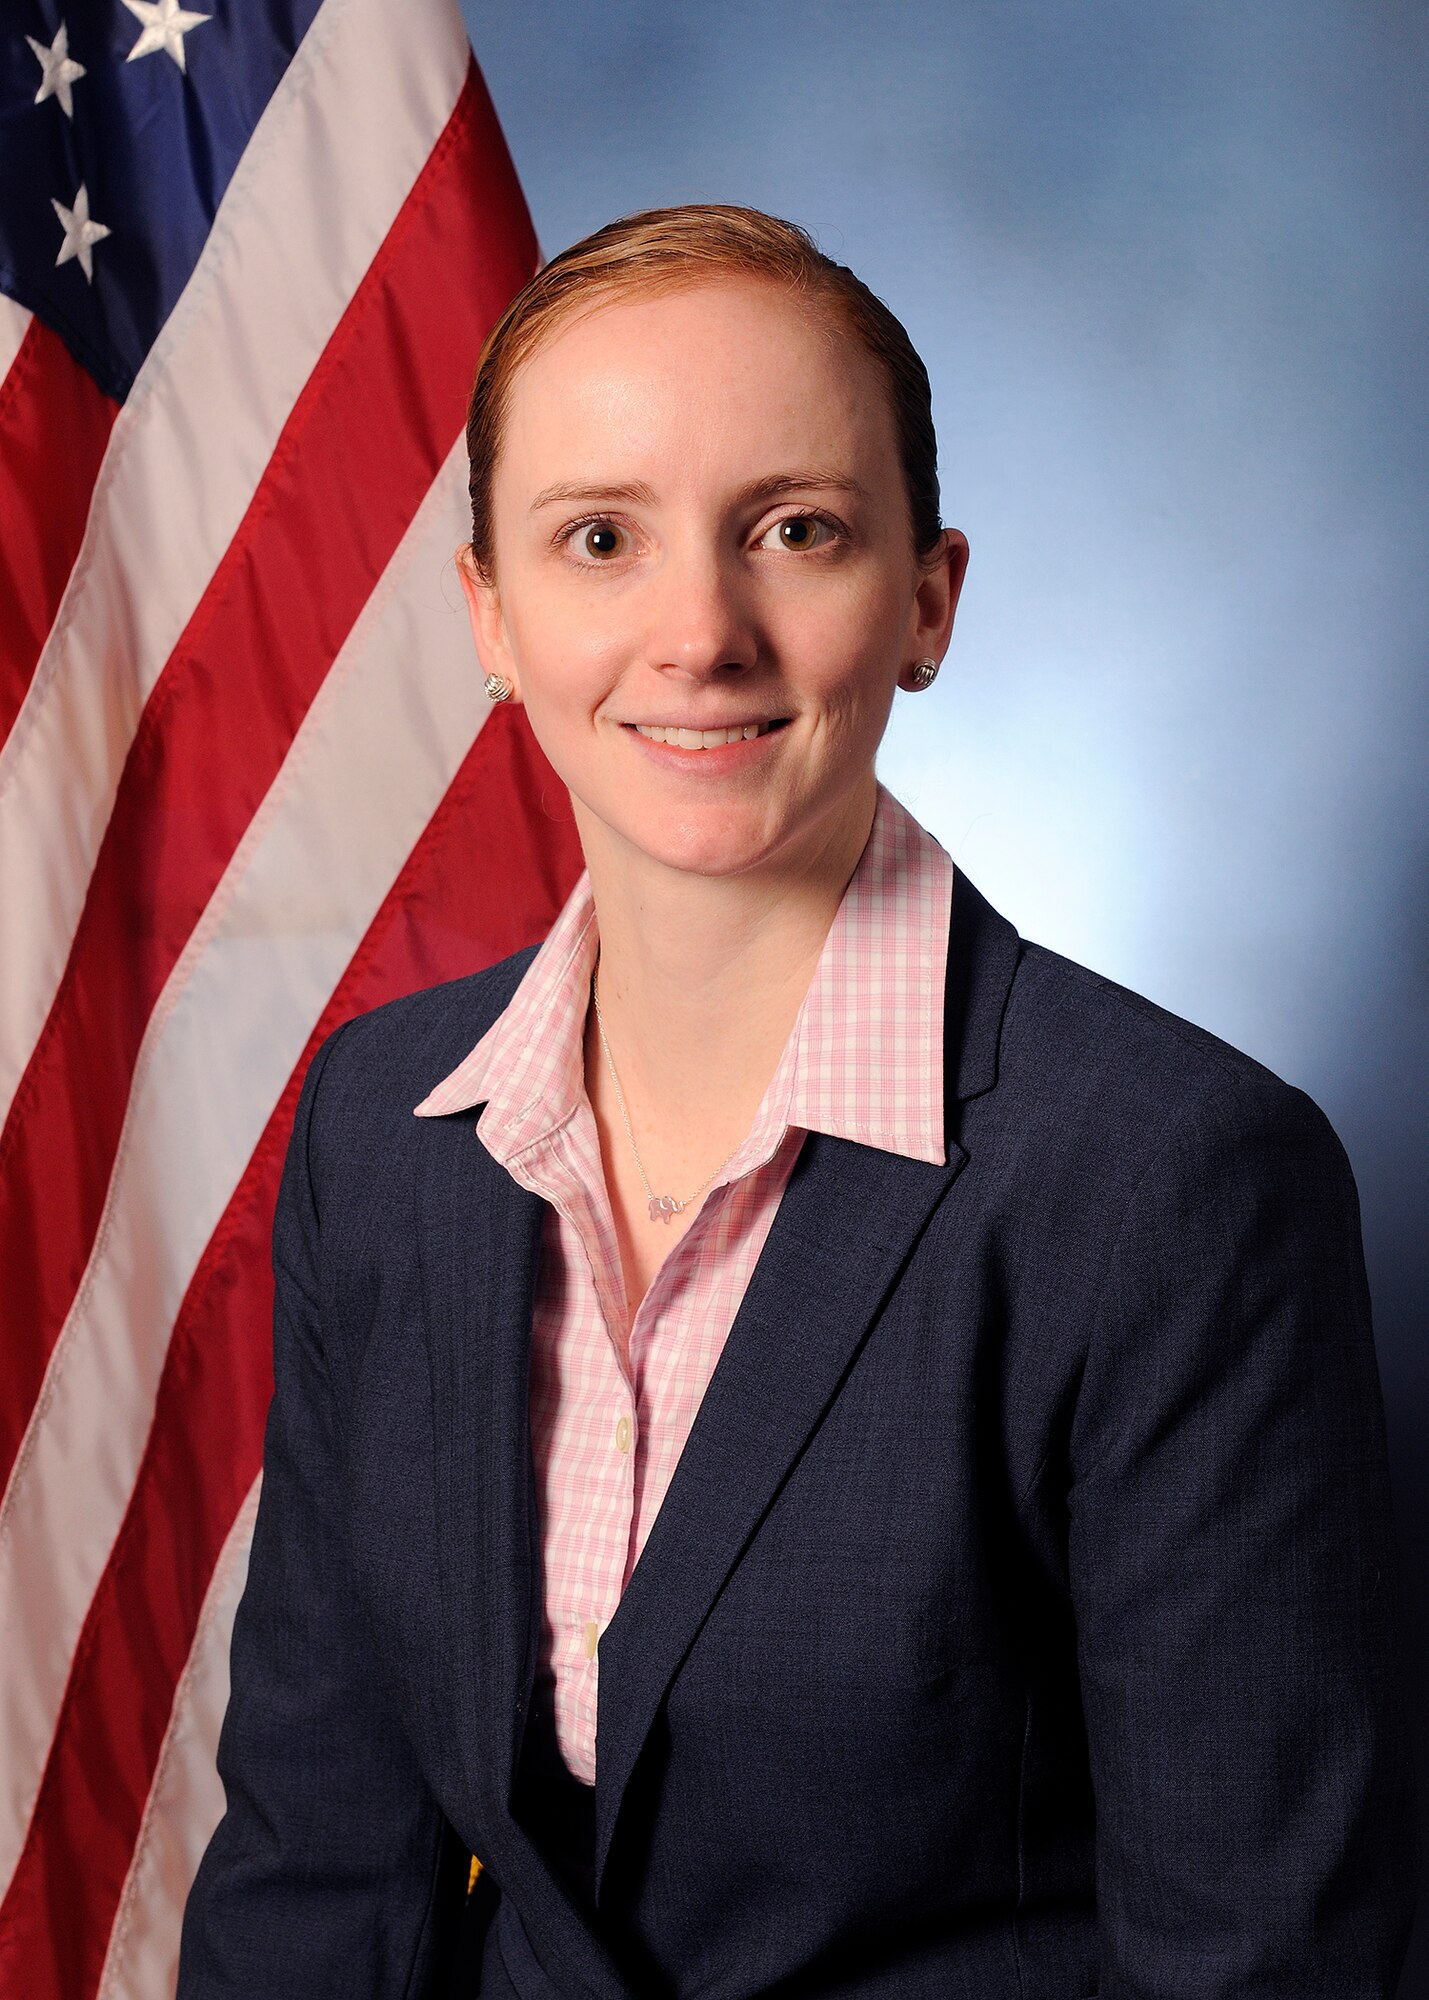 Dr. Victoria Horan  was selected as The Mohawk Valley Engineers Executive Council (MVEEC) Young Technologist of the Year.  